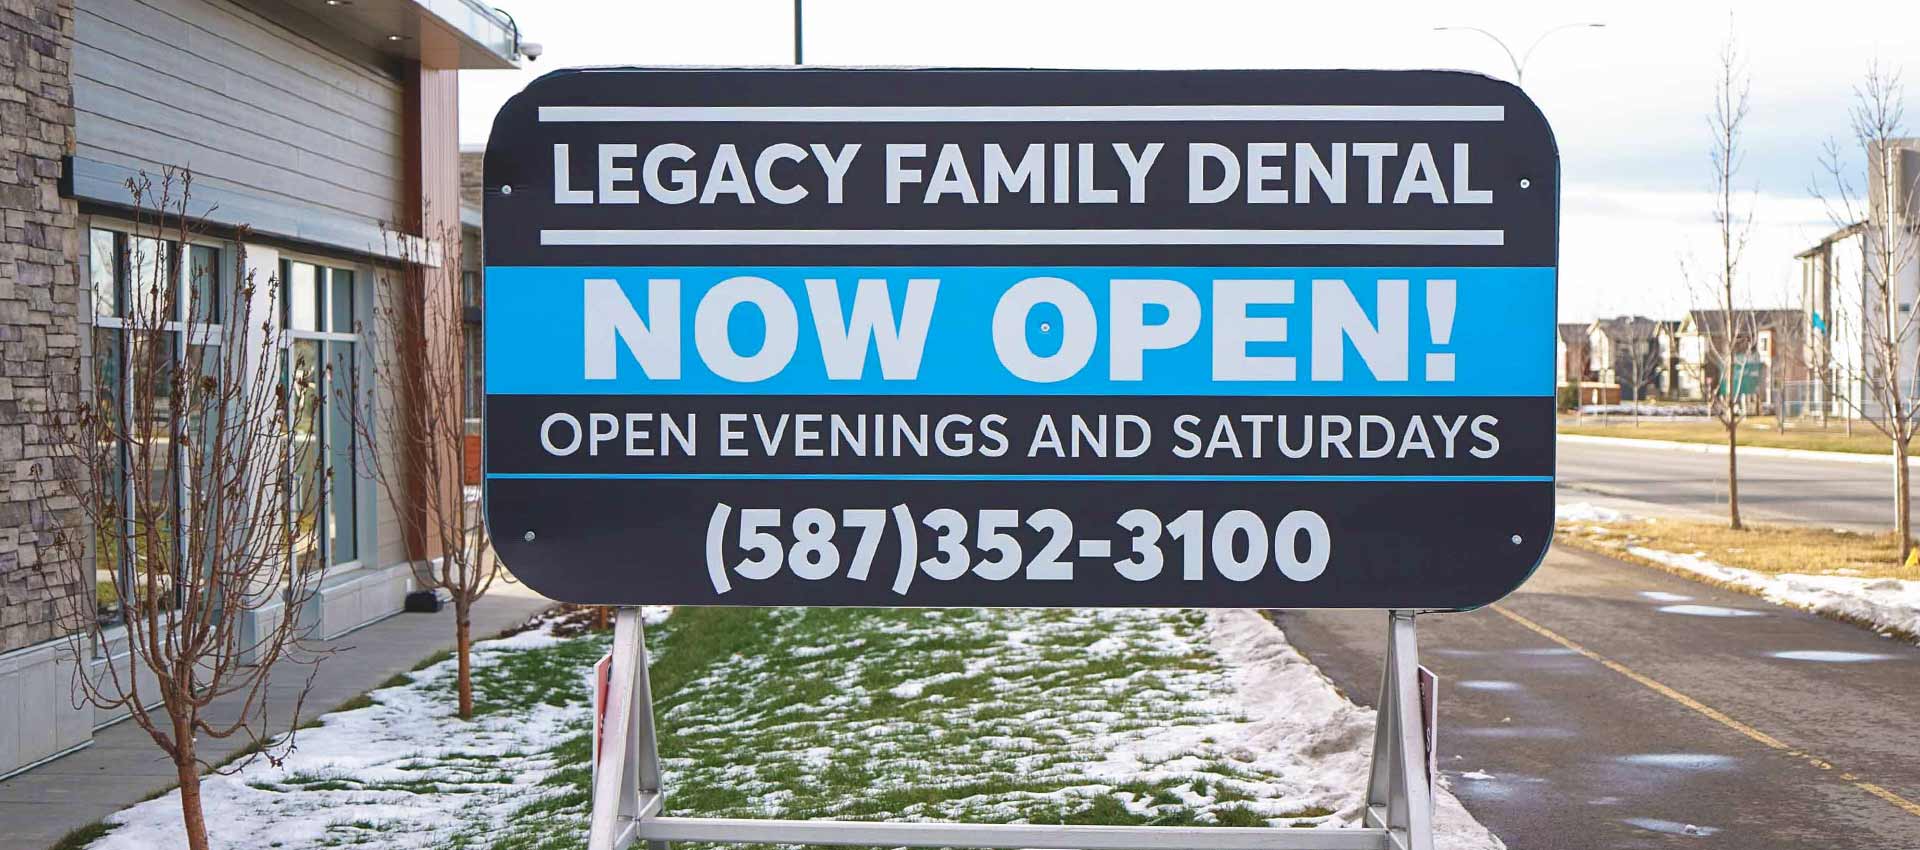 Legacy Family Dental Now Open Sign